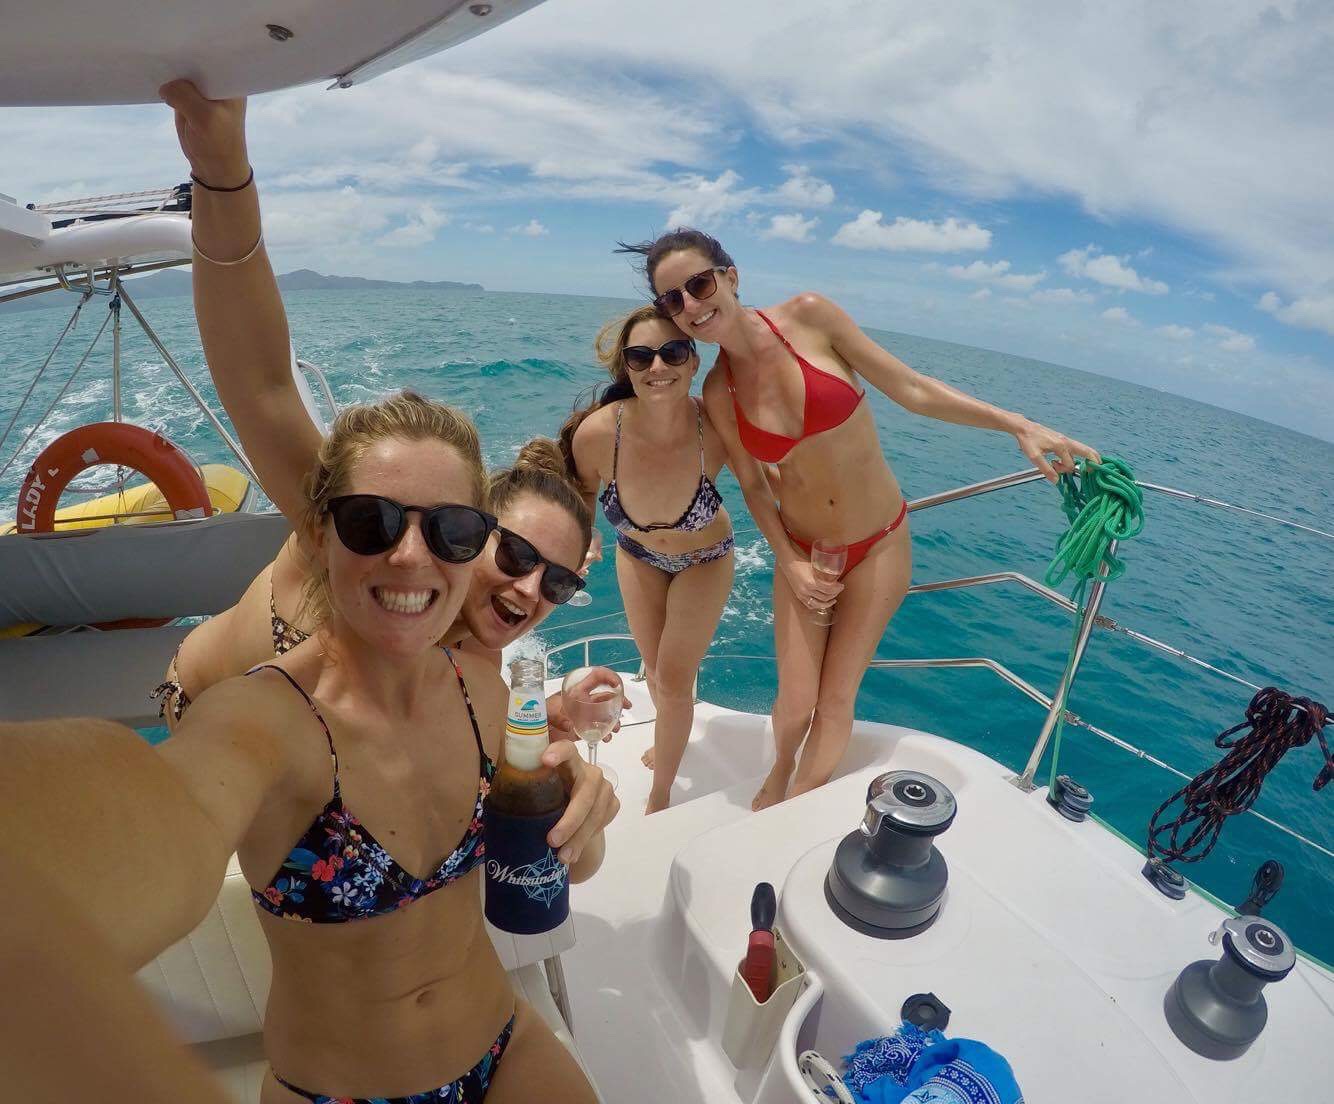 #abikiniaday when you go bareboating with Whitsunday Escape on the ultimate girls trip